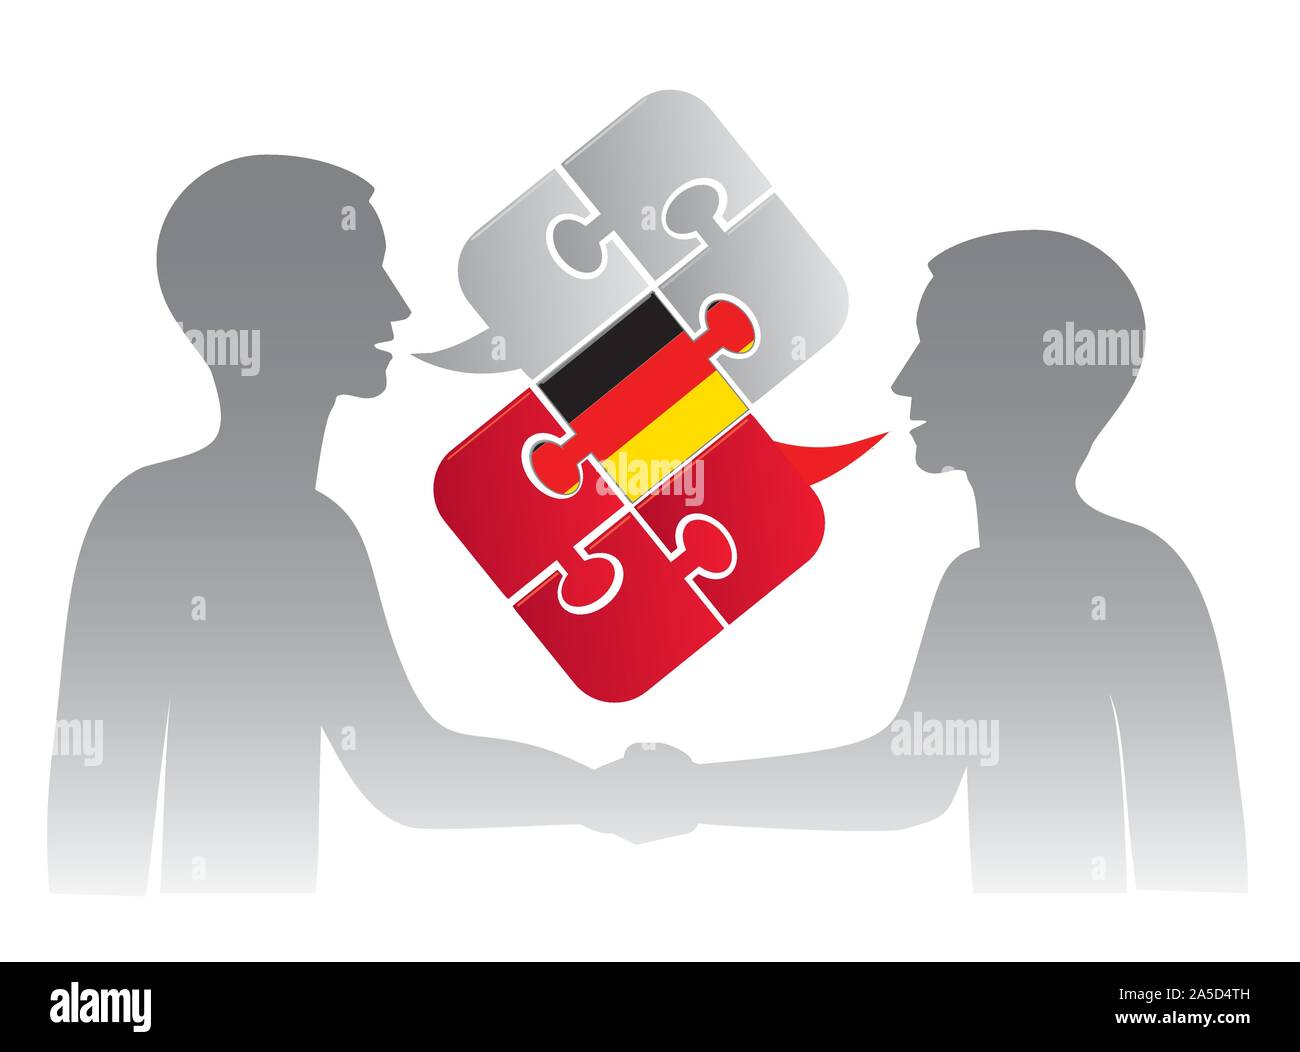 Two businessmen speaking German. Illustration of two businessmen shaking hands on business meeting and puzzle speech bubble with german flag. Stock Vector